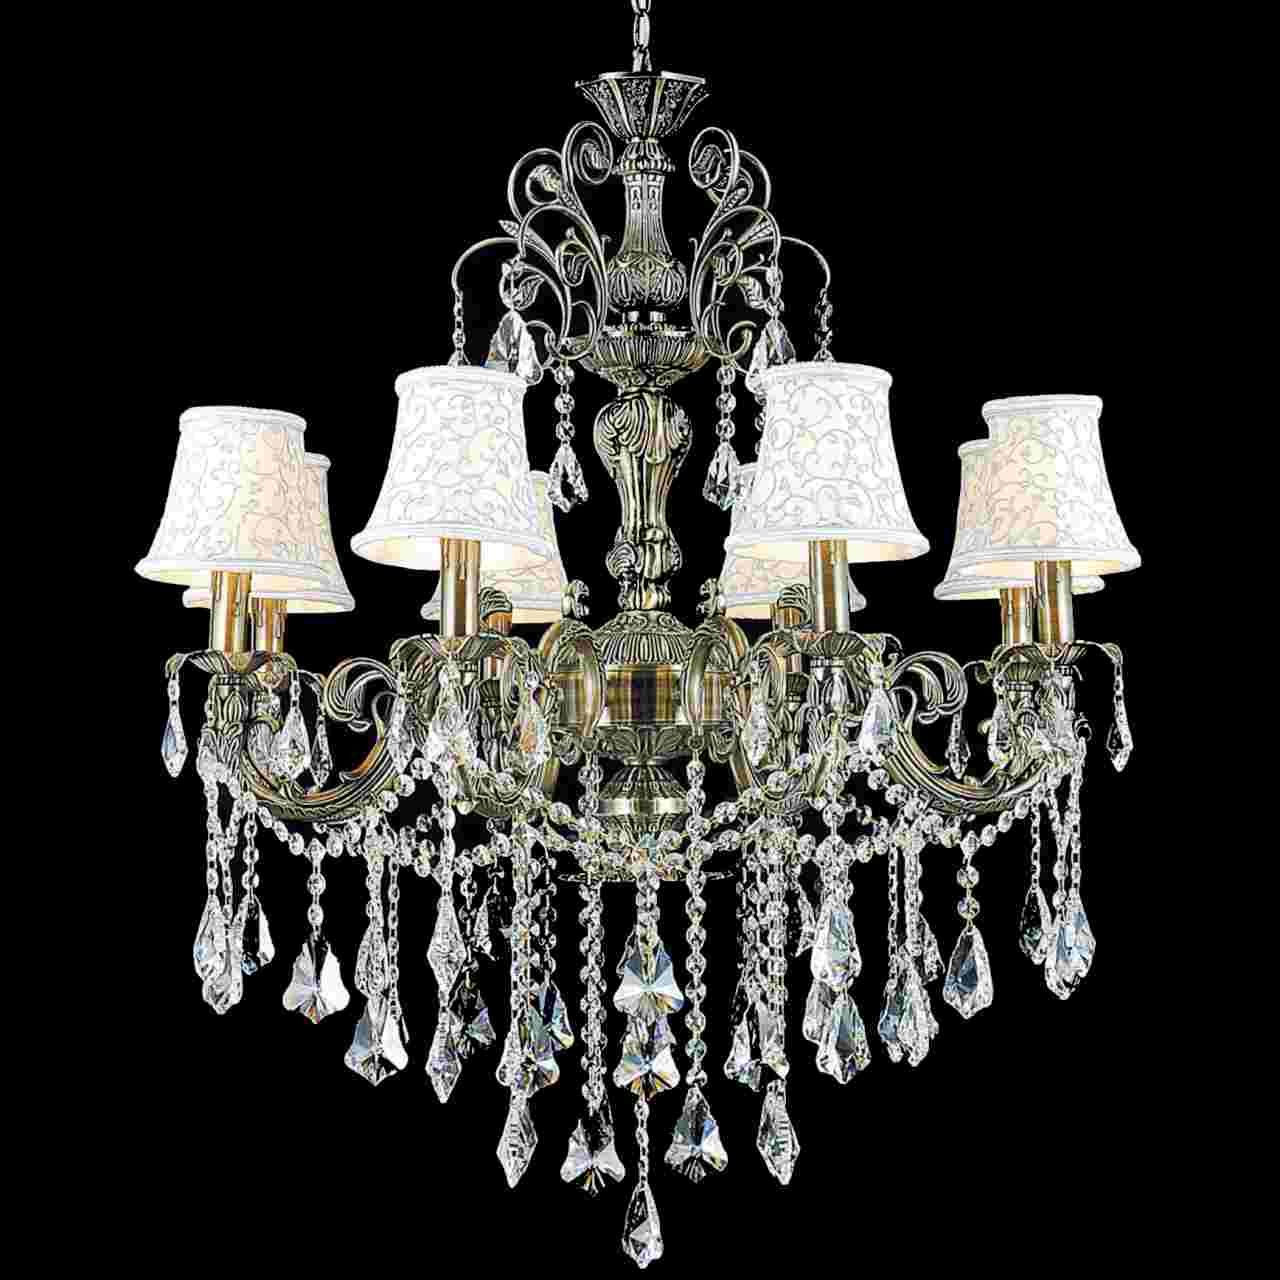 Appealing Traditional Chandelier Lighting With Shop Lnc 6 Inside Popular Bouchette Traditional 6 Light Candle Style Chandeliers (View 24 of 25)